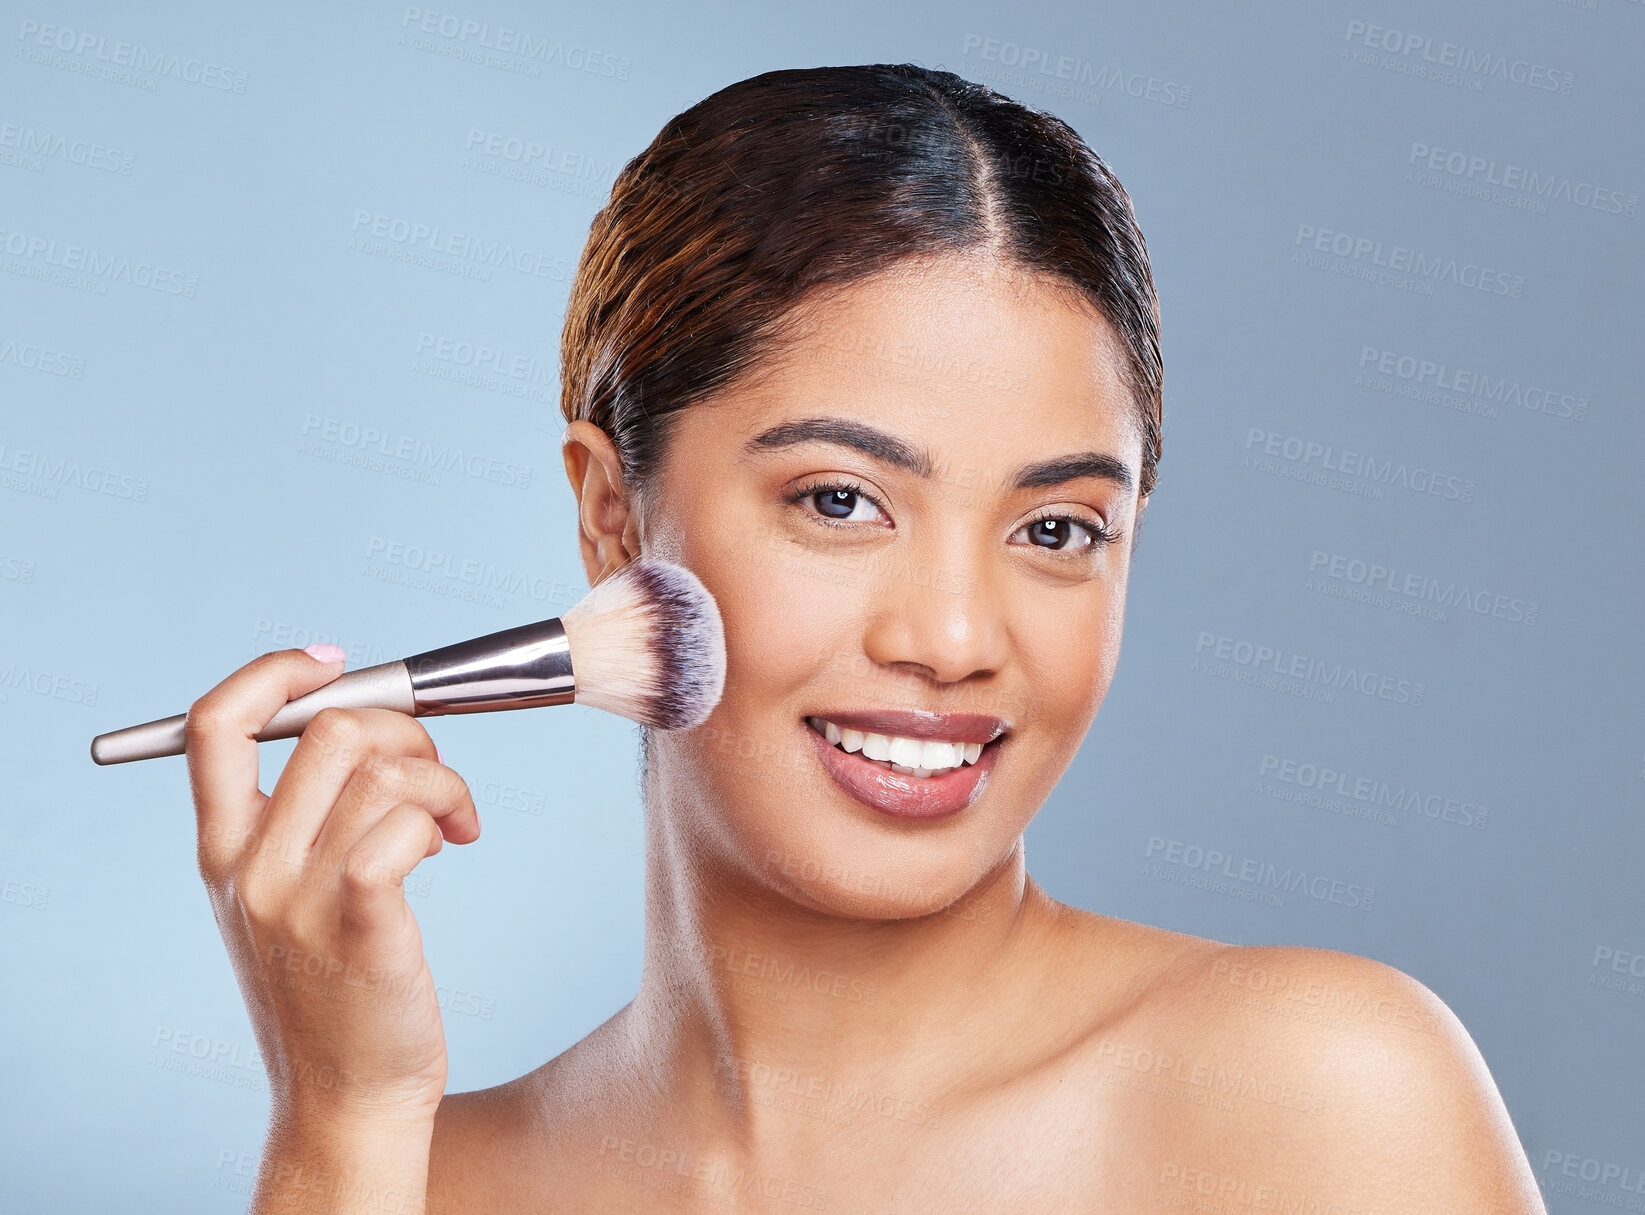 Buy stock photo Shot of a young woman applying makeup to her face against a grey background